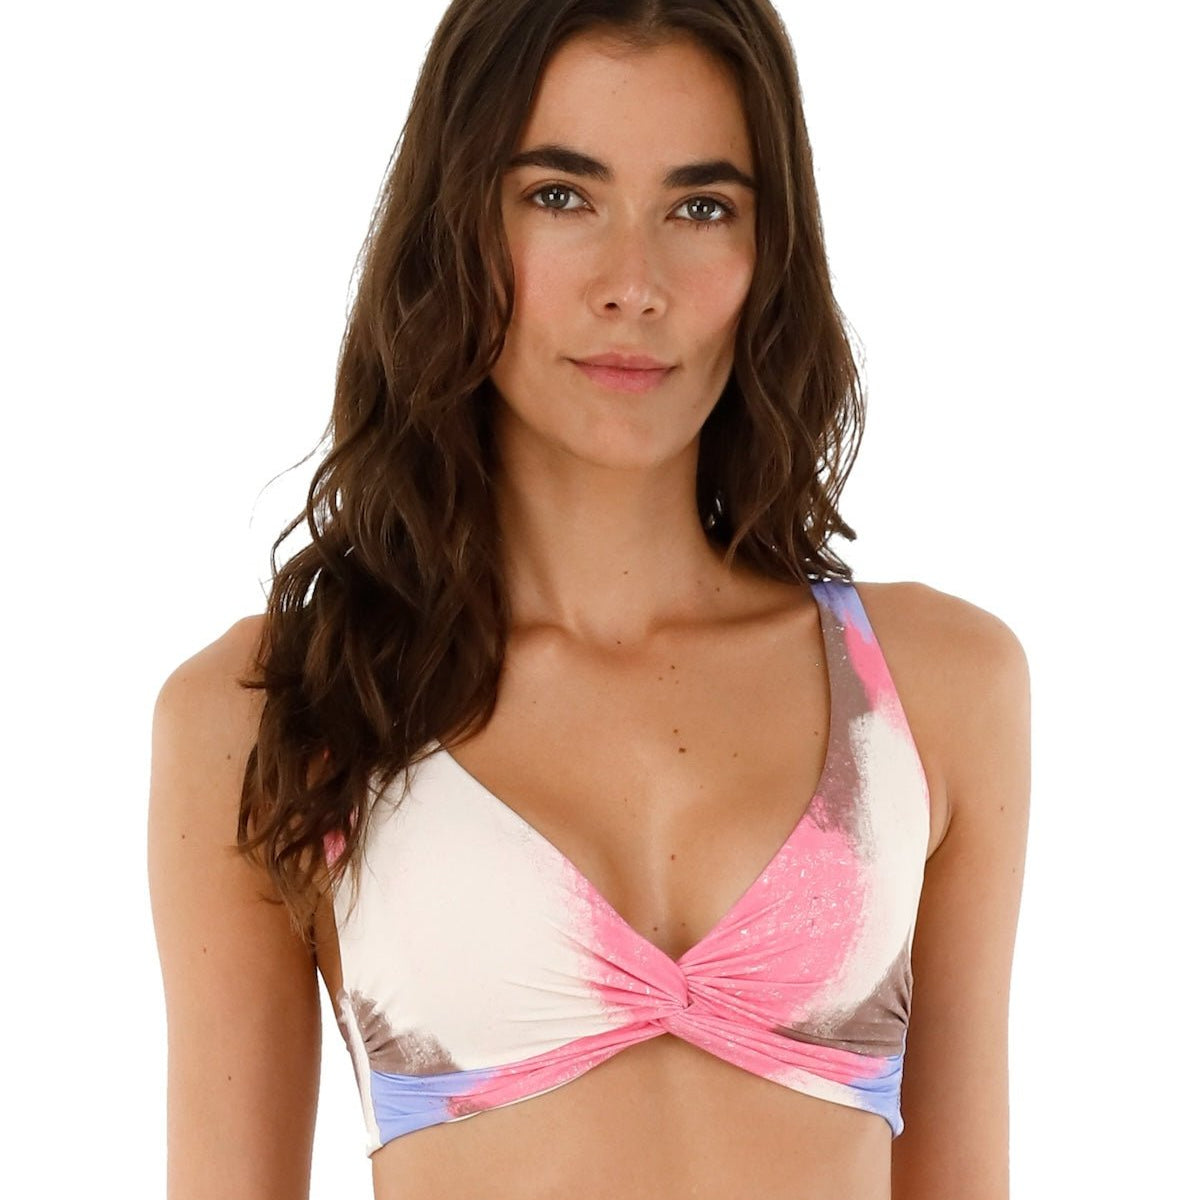 Image of a woman wearing a tie die swimsuit top by Malai Swimwear. She's smiling and standing on a white background. The purpose of this image is to highlight the bikini.